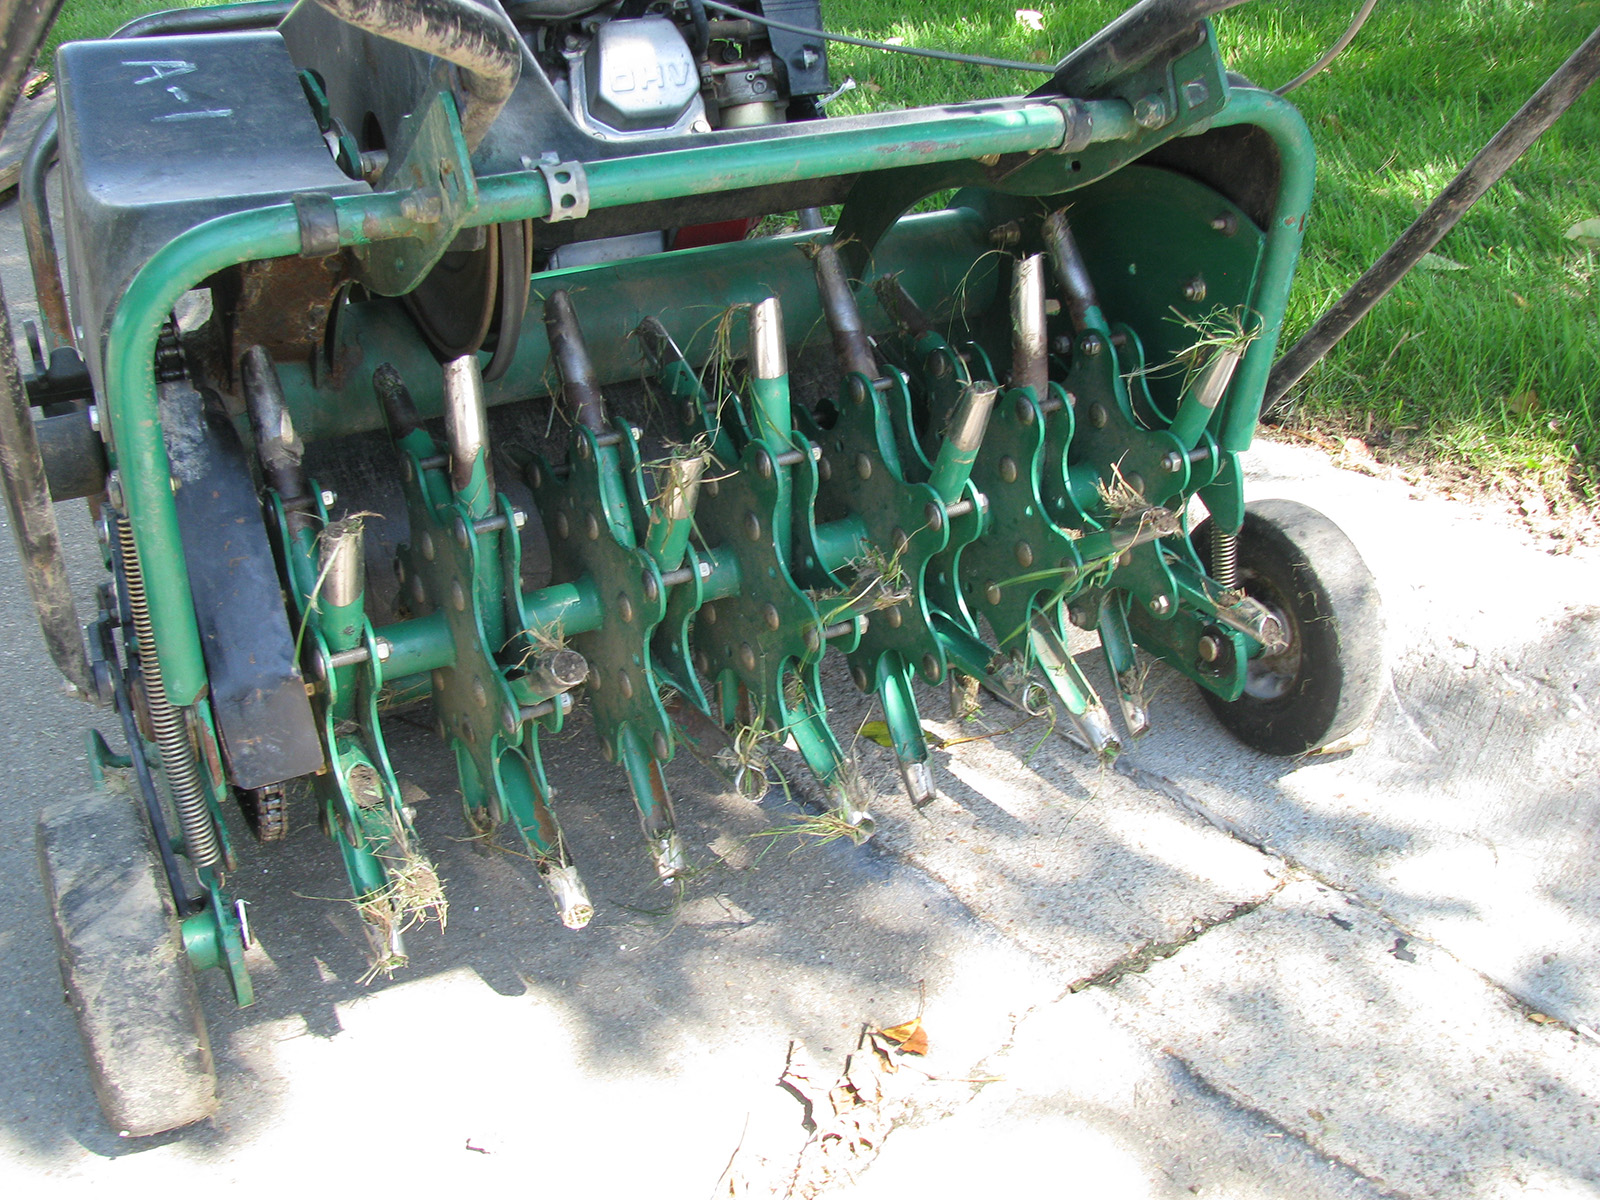 Picture of a aerator for the lawn.